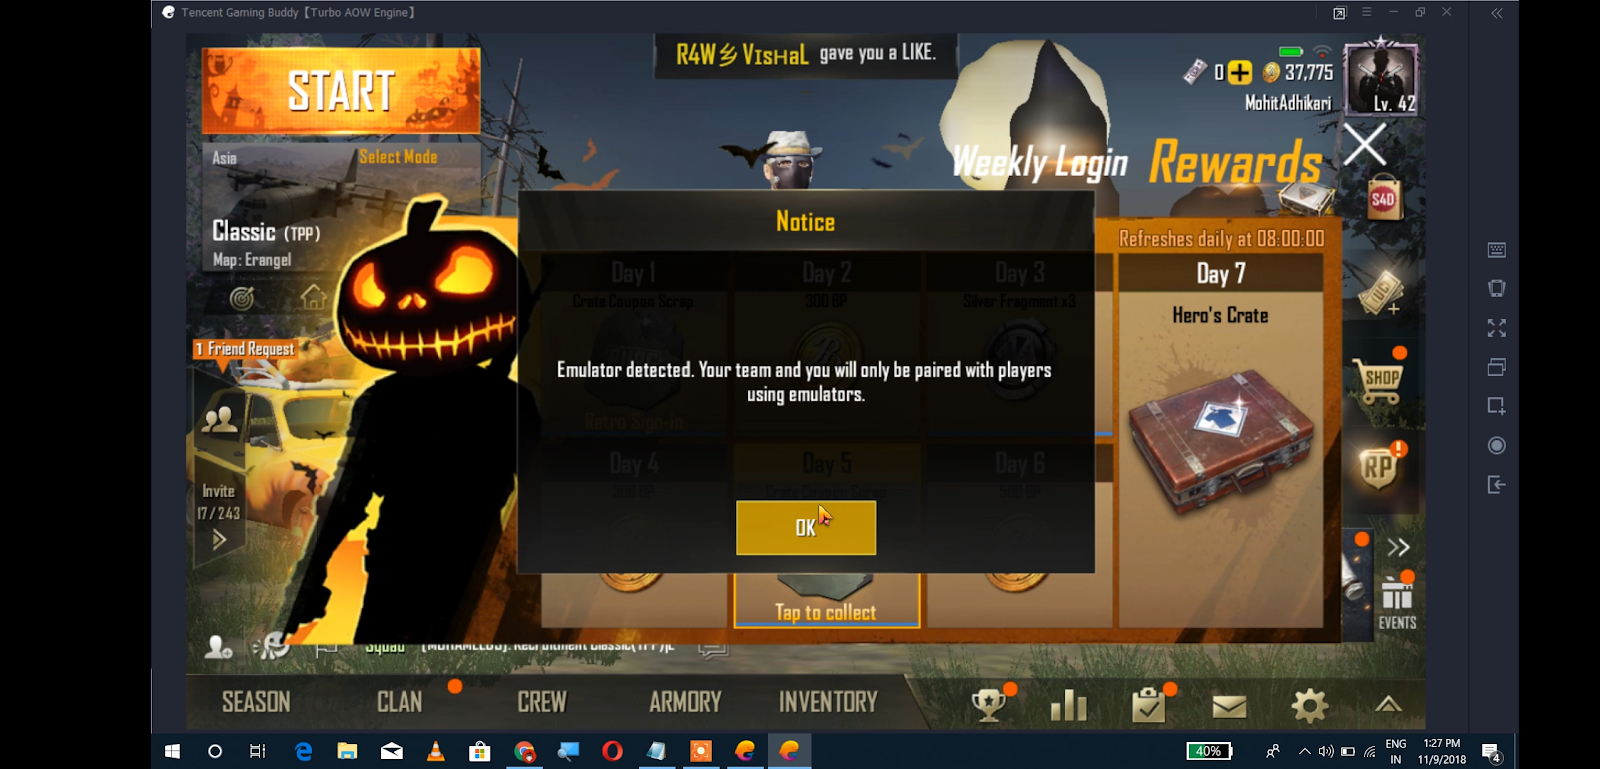 Tencent gaming buddy tencent best emulator for pubg mobile фото 103